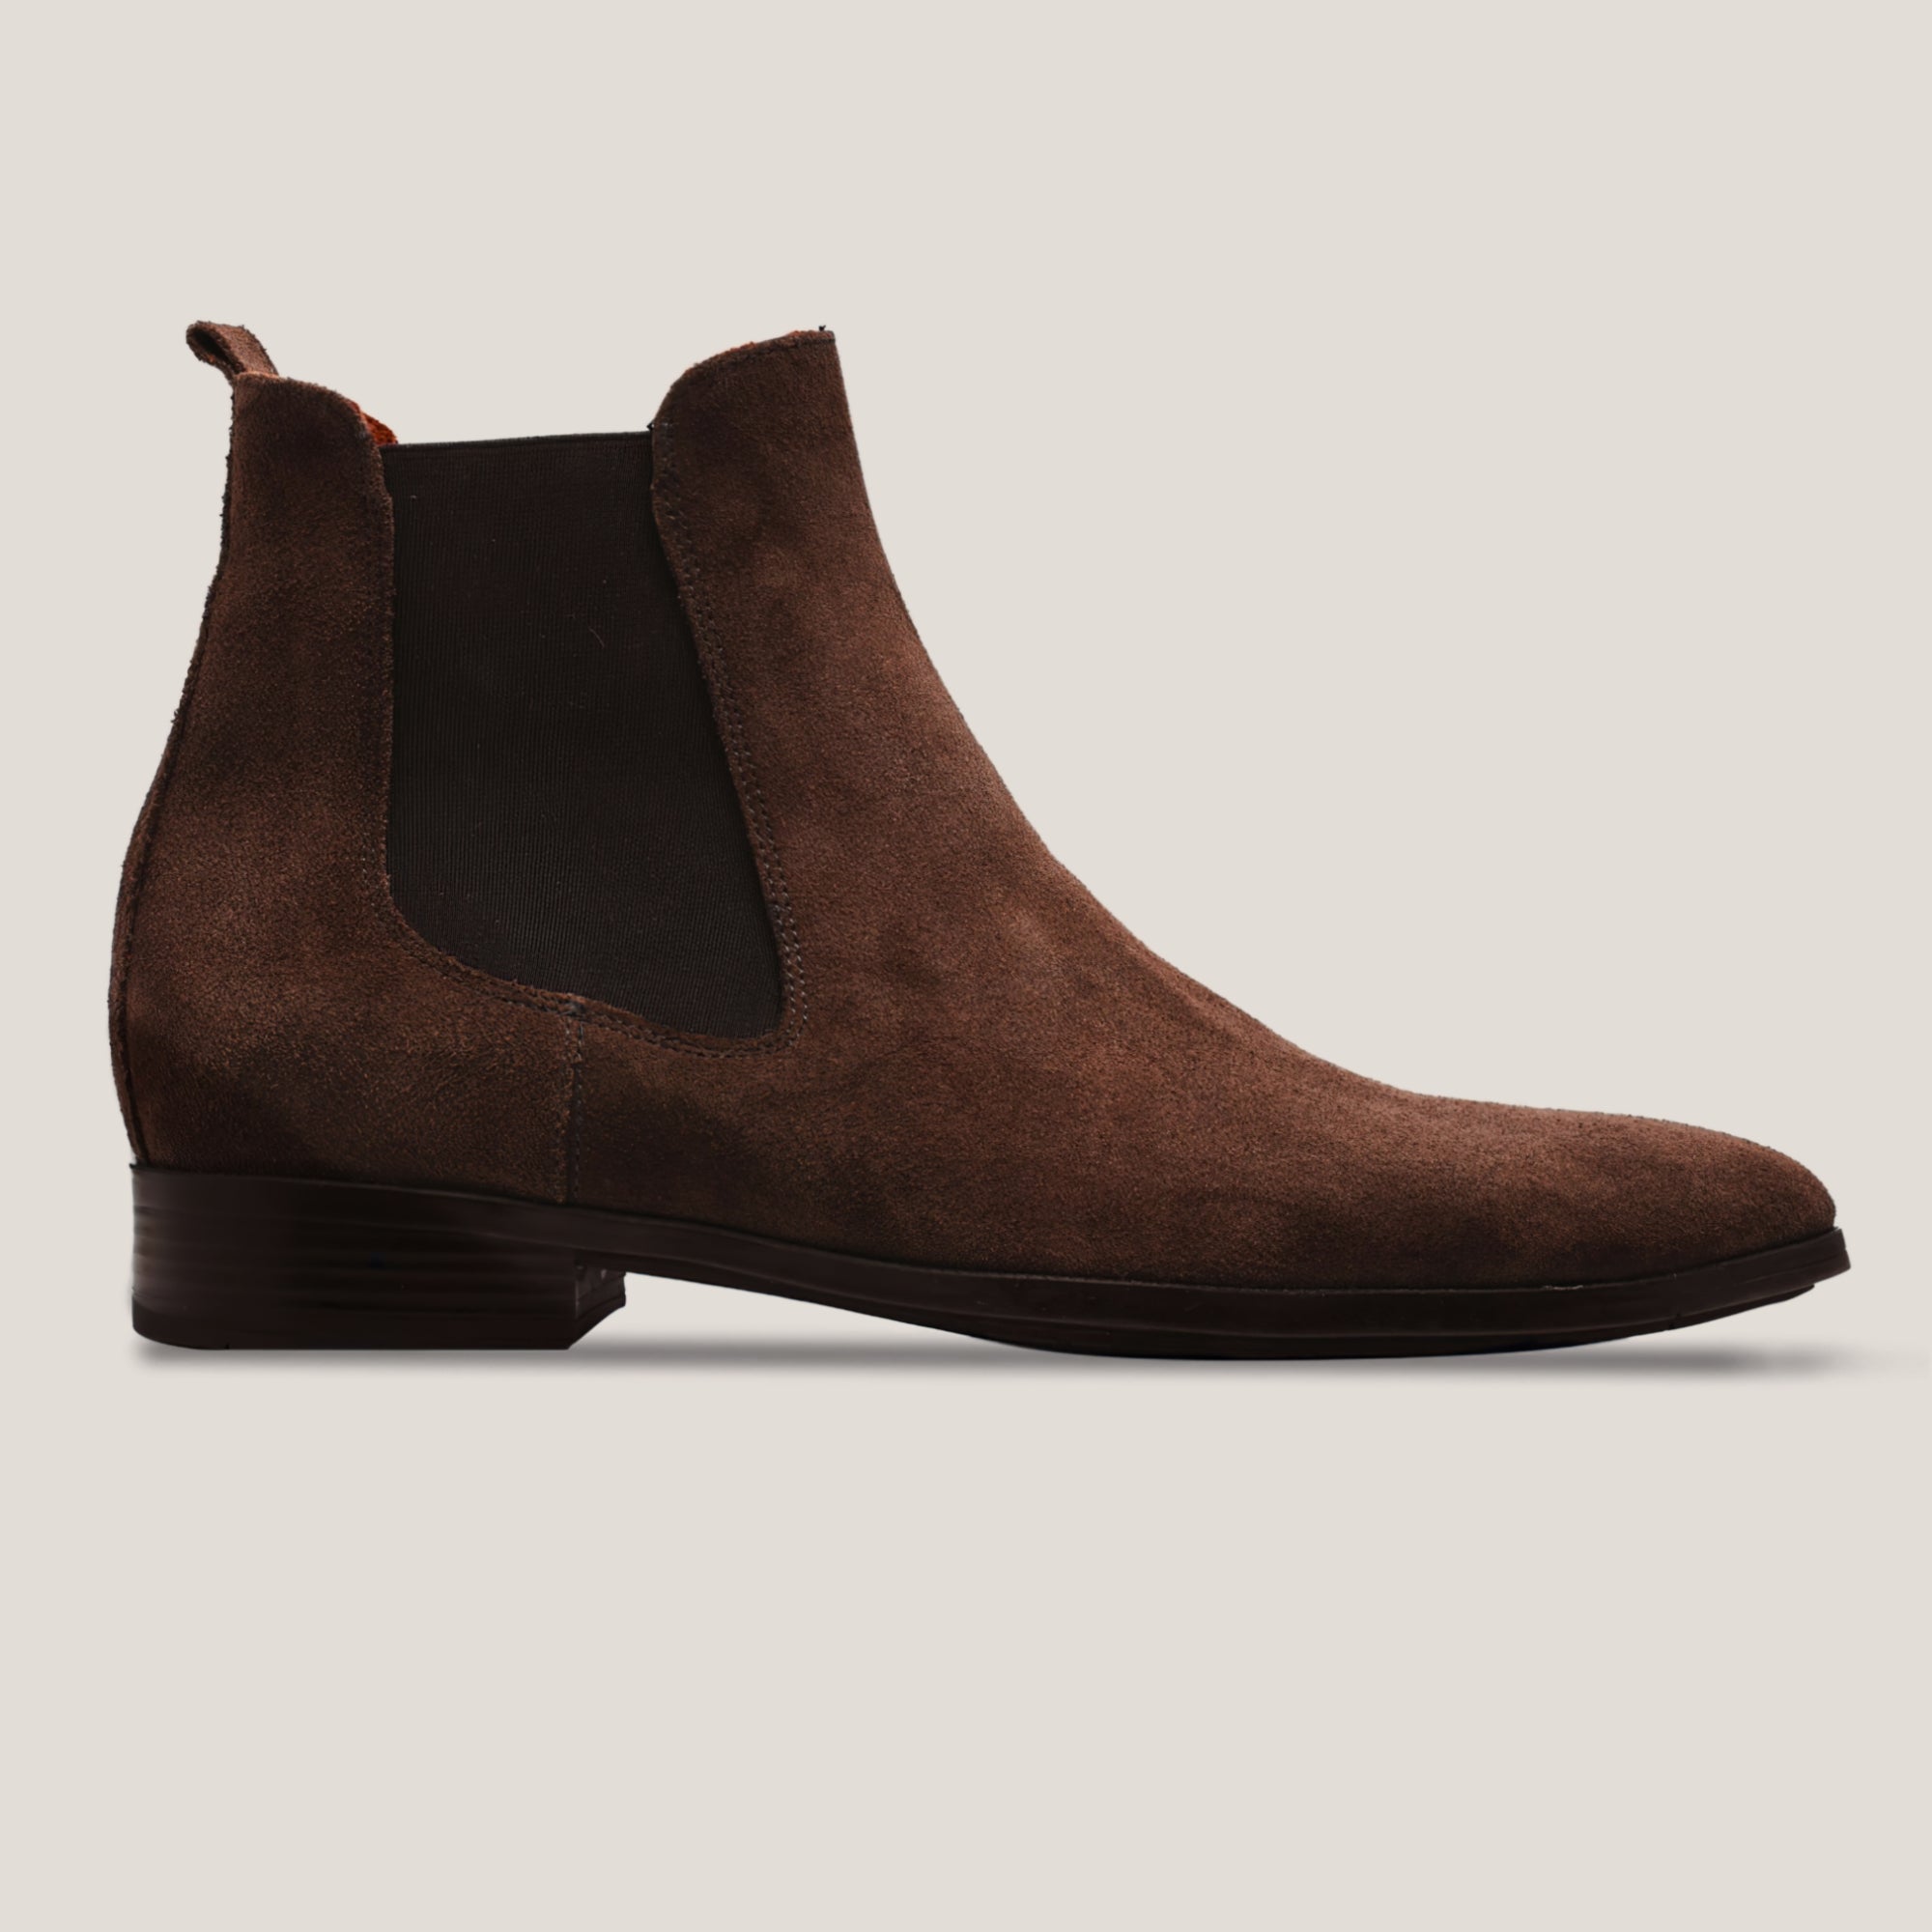 Chelsea Boot Chocolat Suede - Reinhard Frans - Chelsea Boots